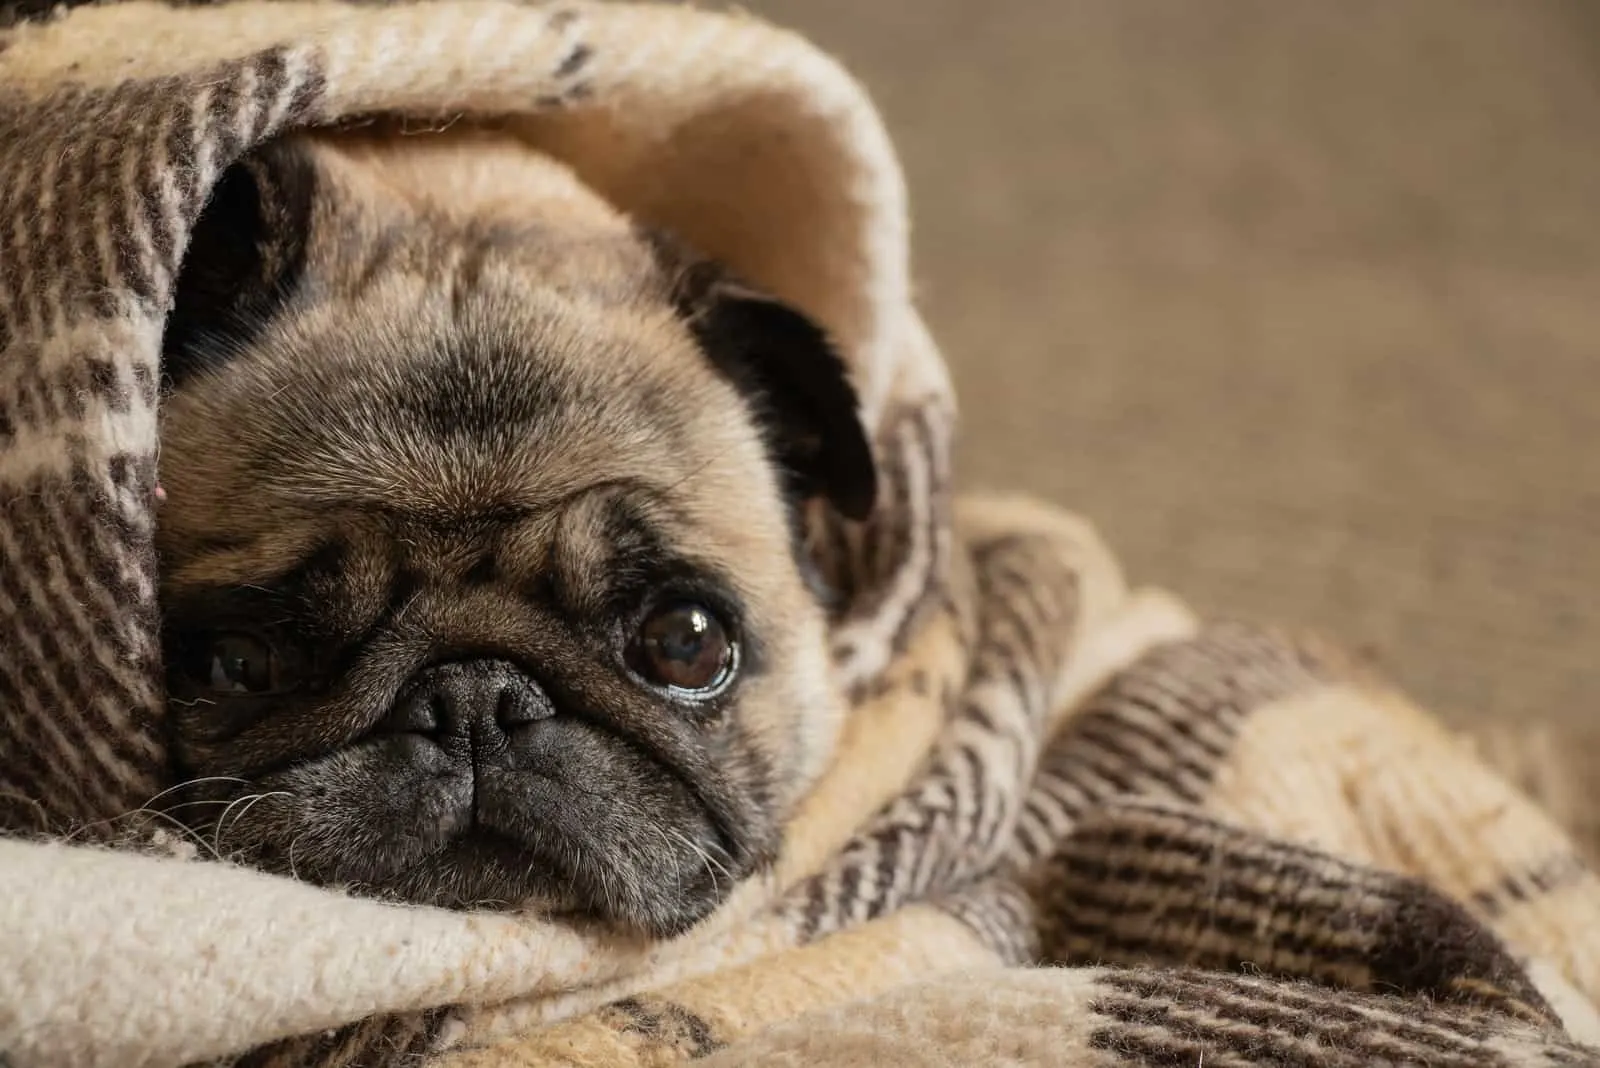 pug lying wrapped up in scarf